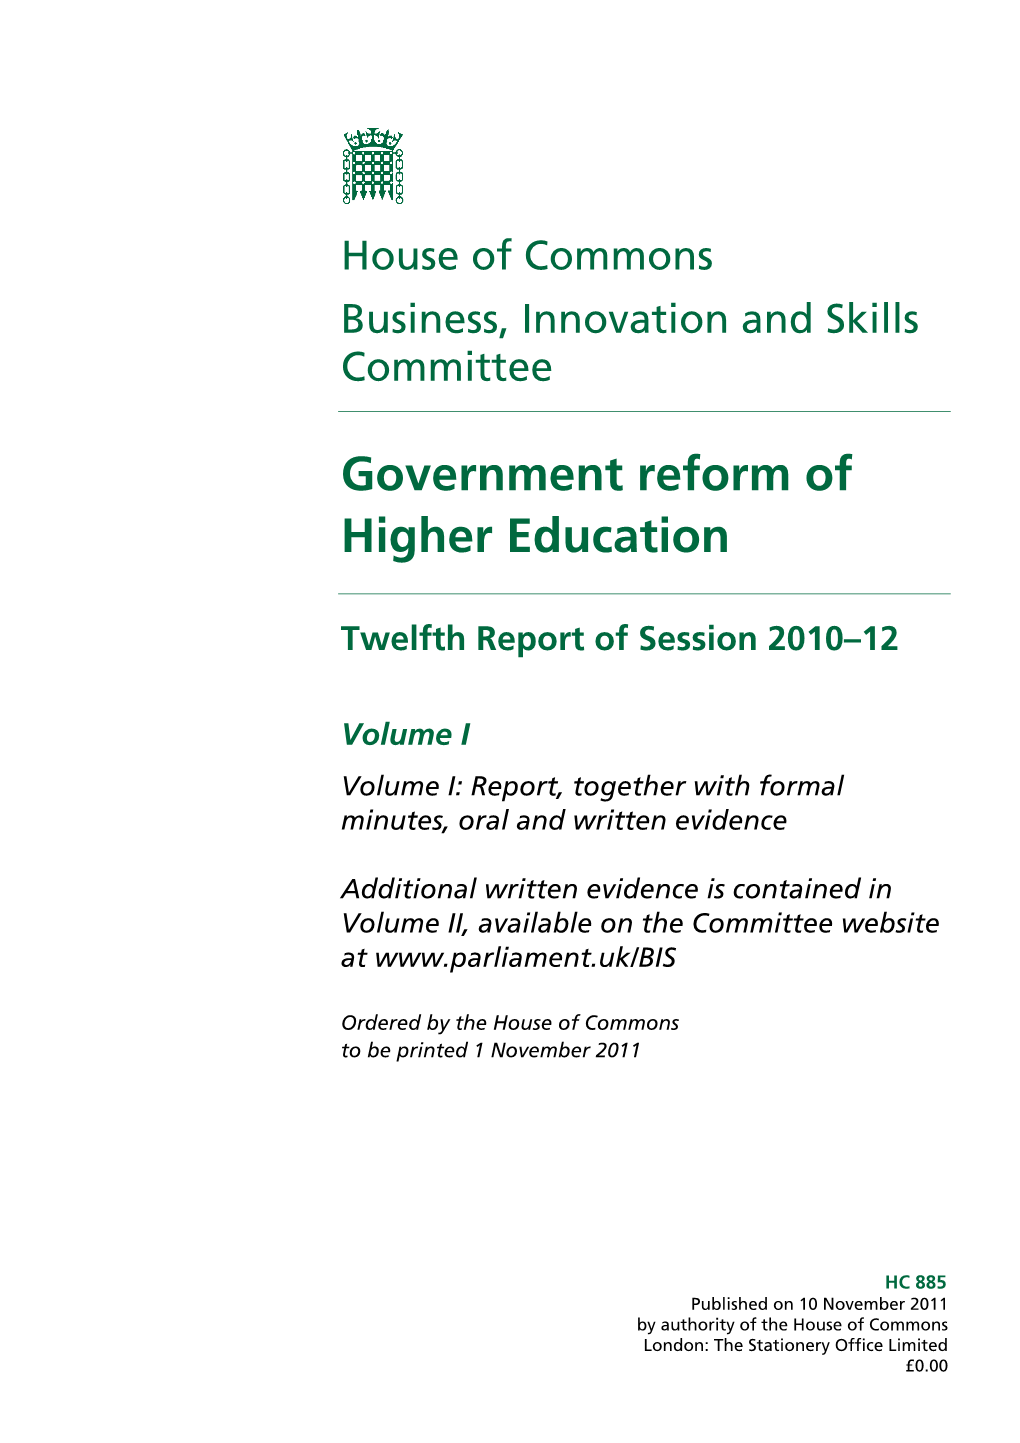 Government Reform of Higher Education